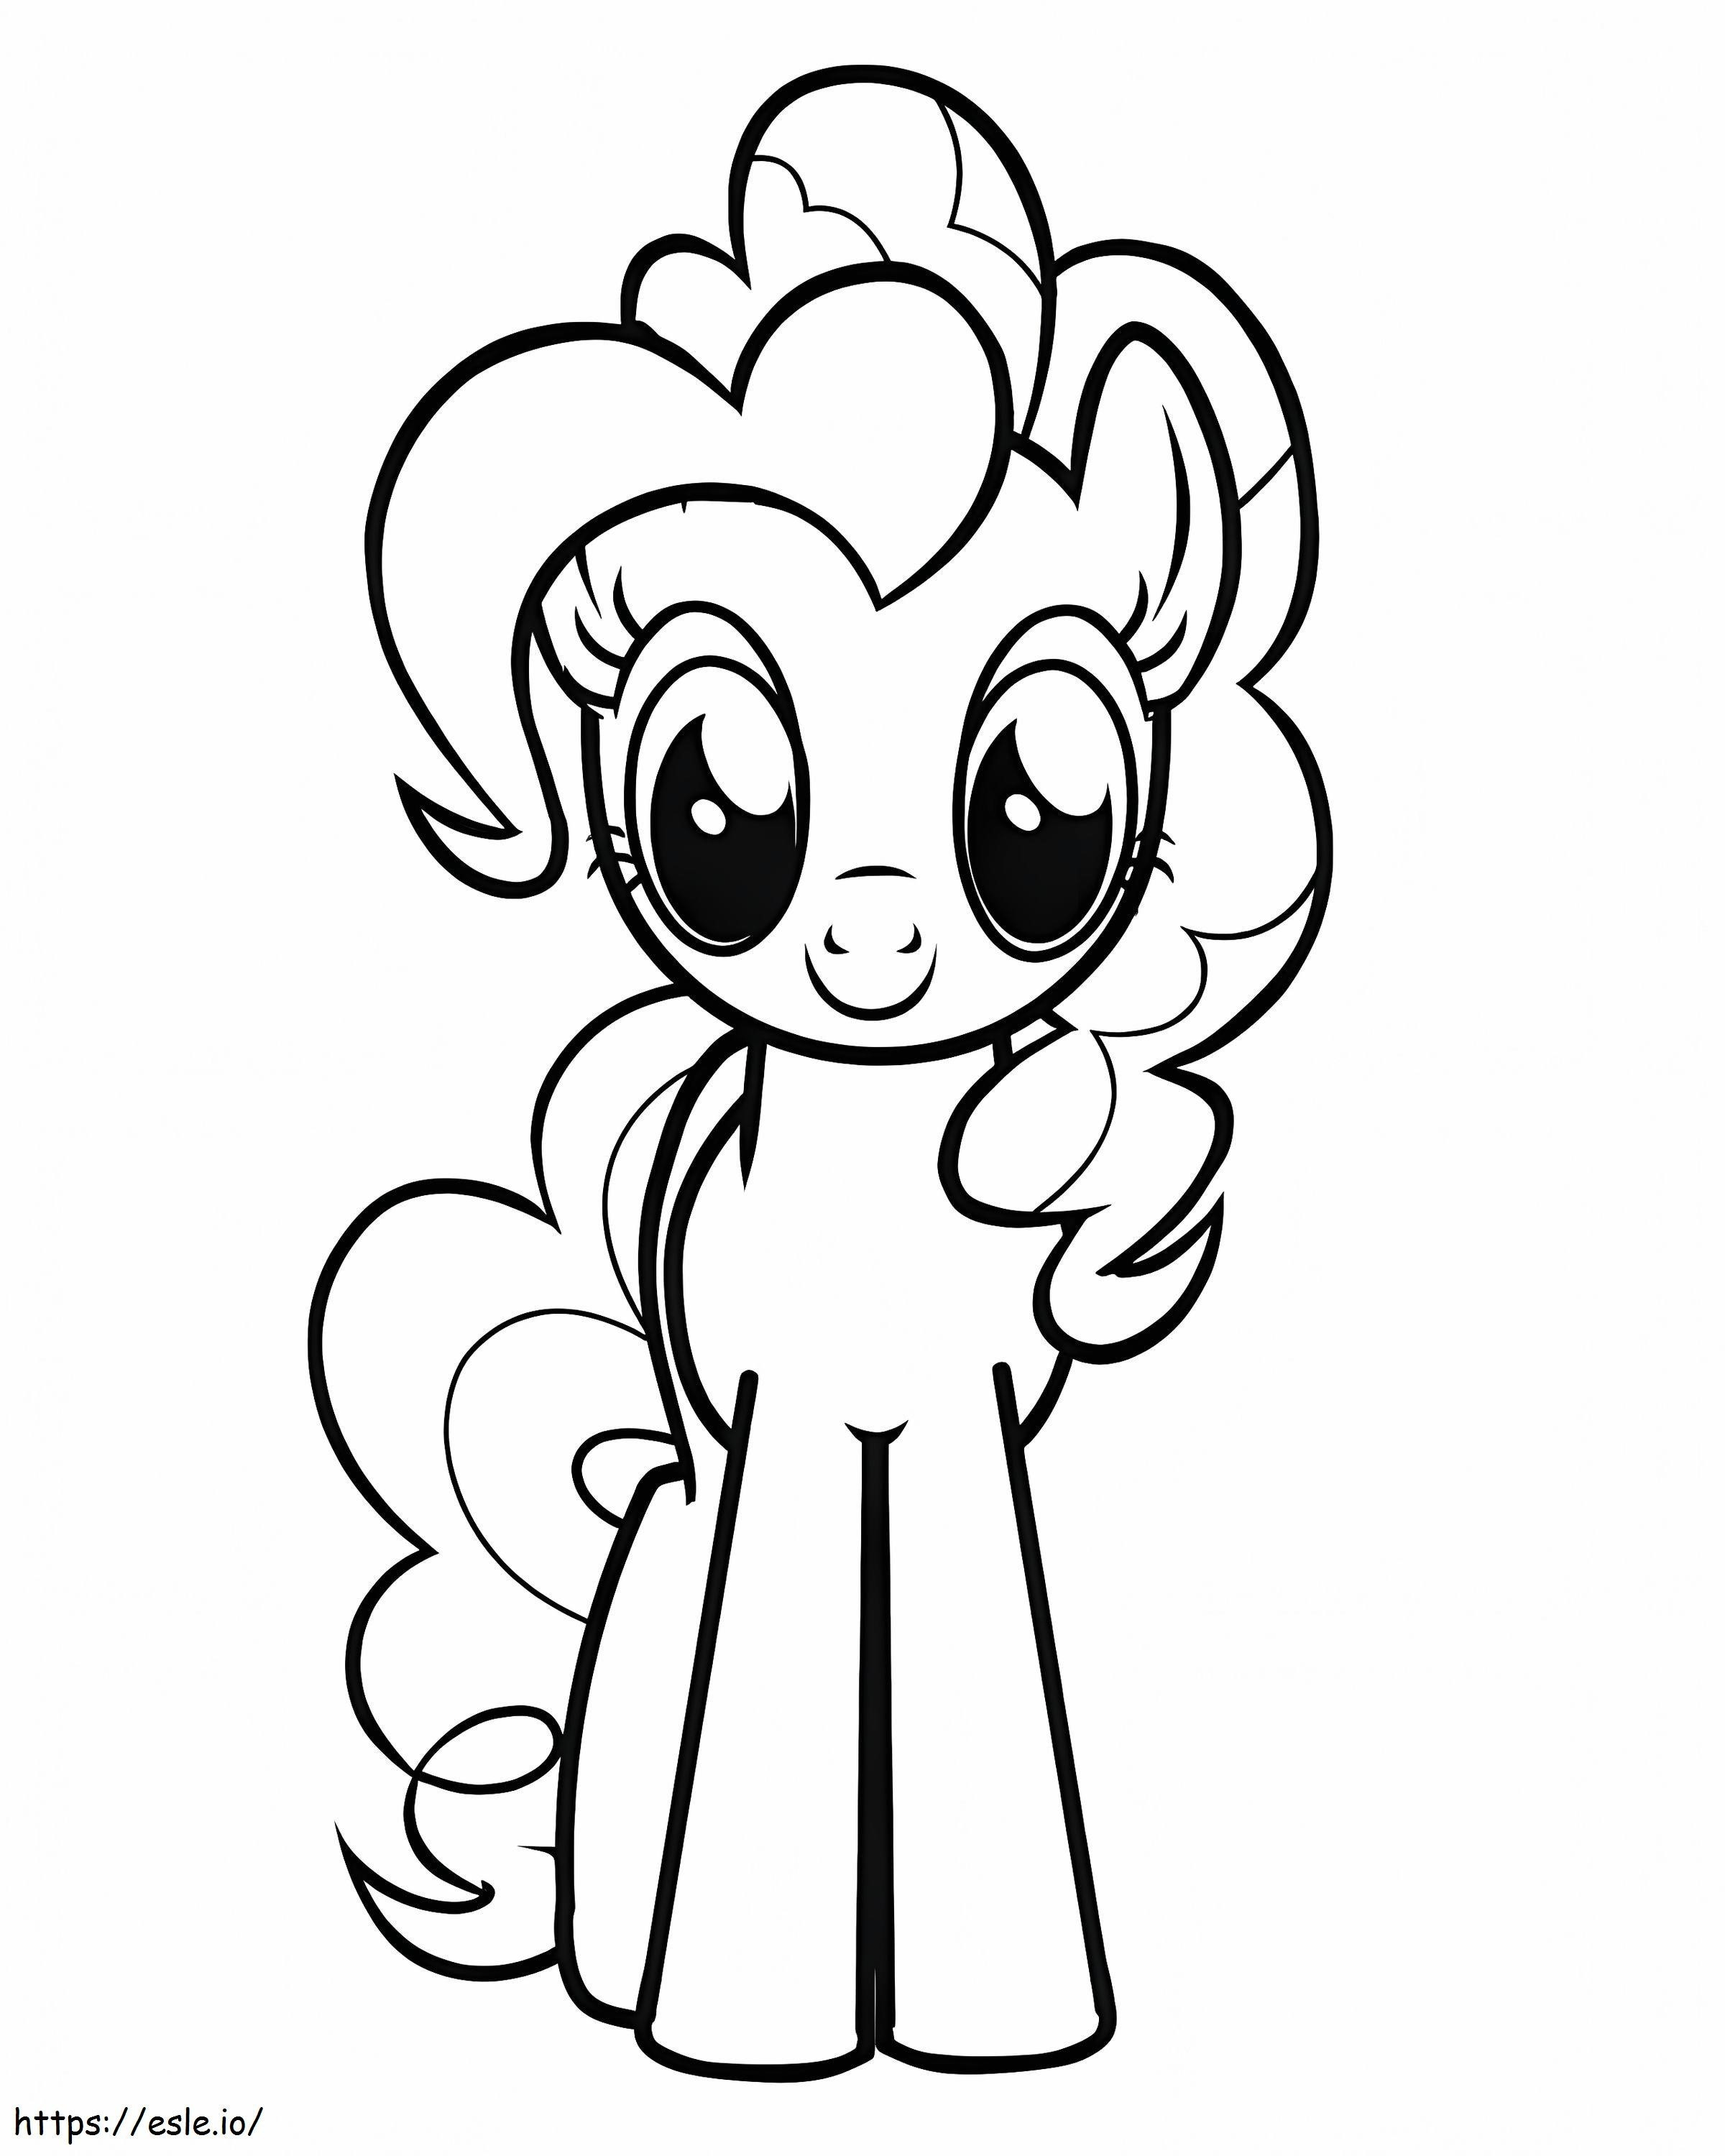 Cute Pinkie Pie coloring page